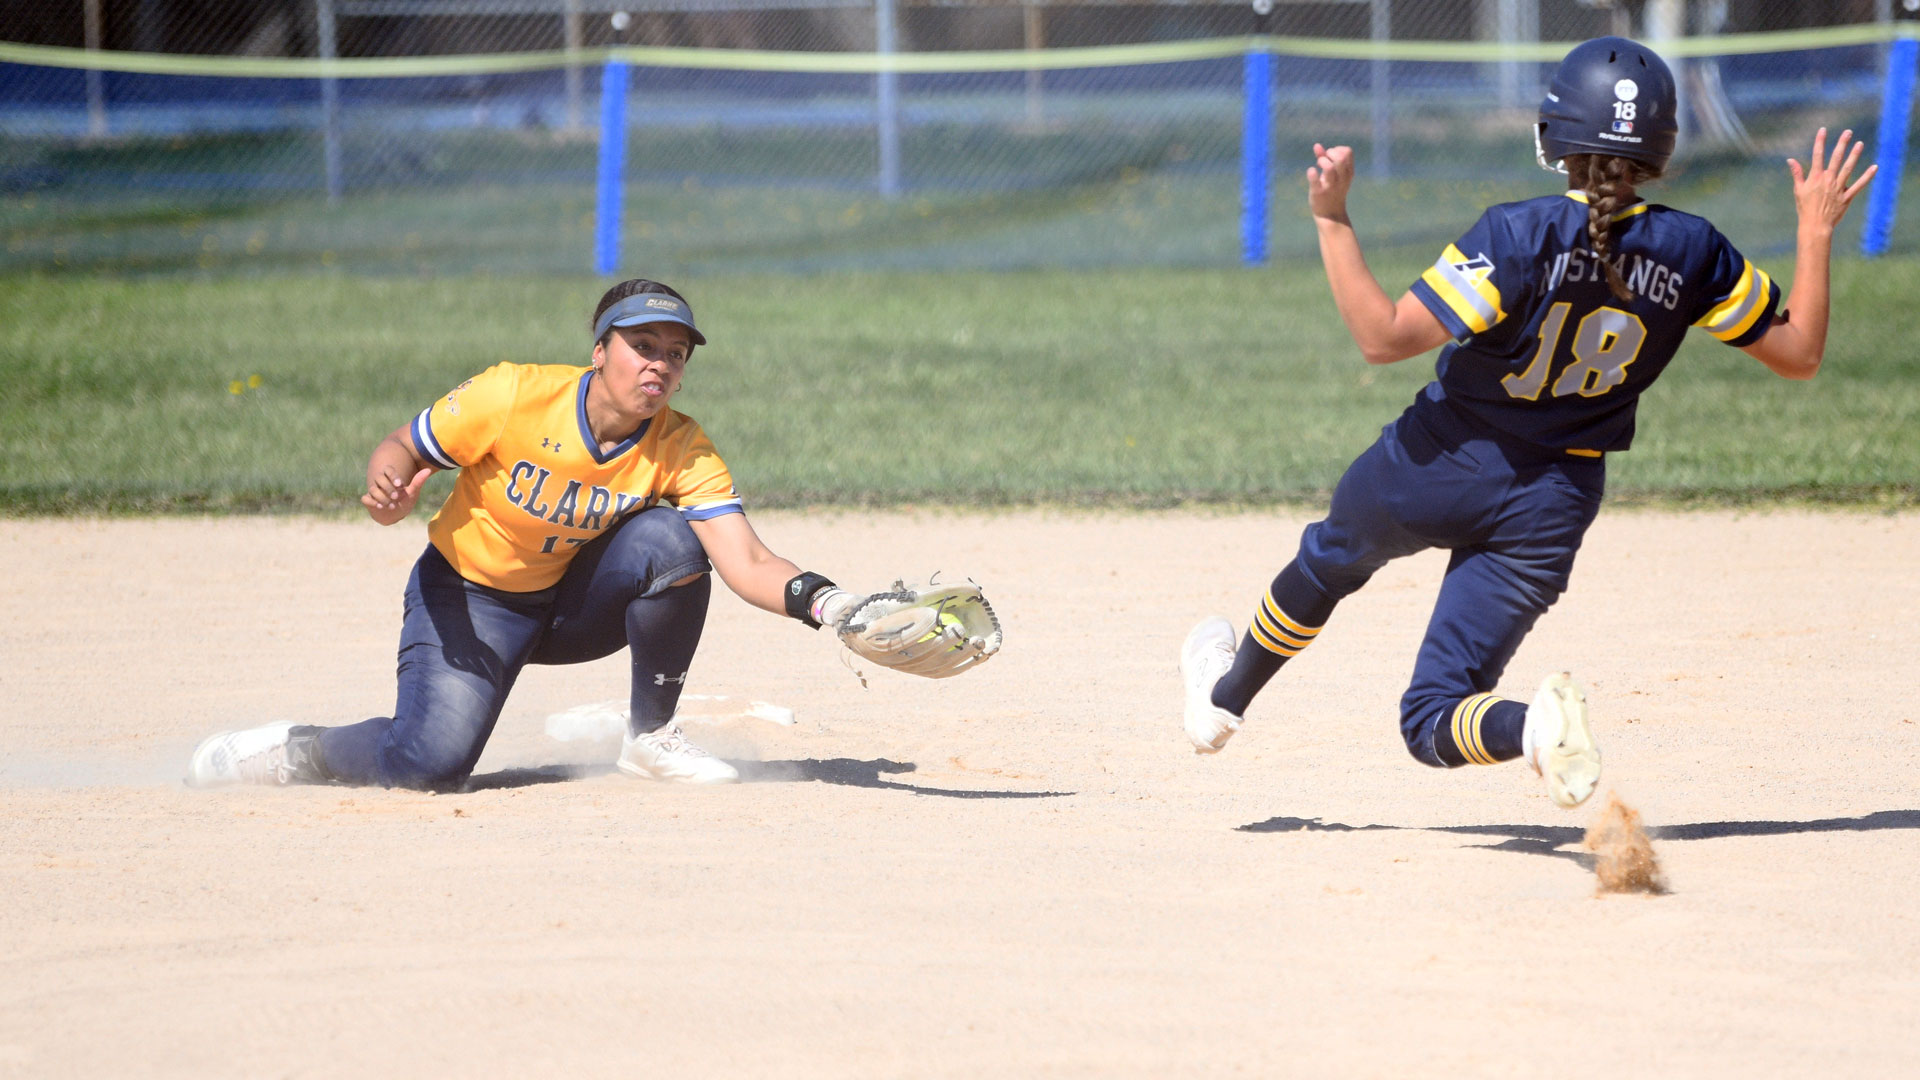 Pride overcome tough start to split doubleheader with Mount Mercy